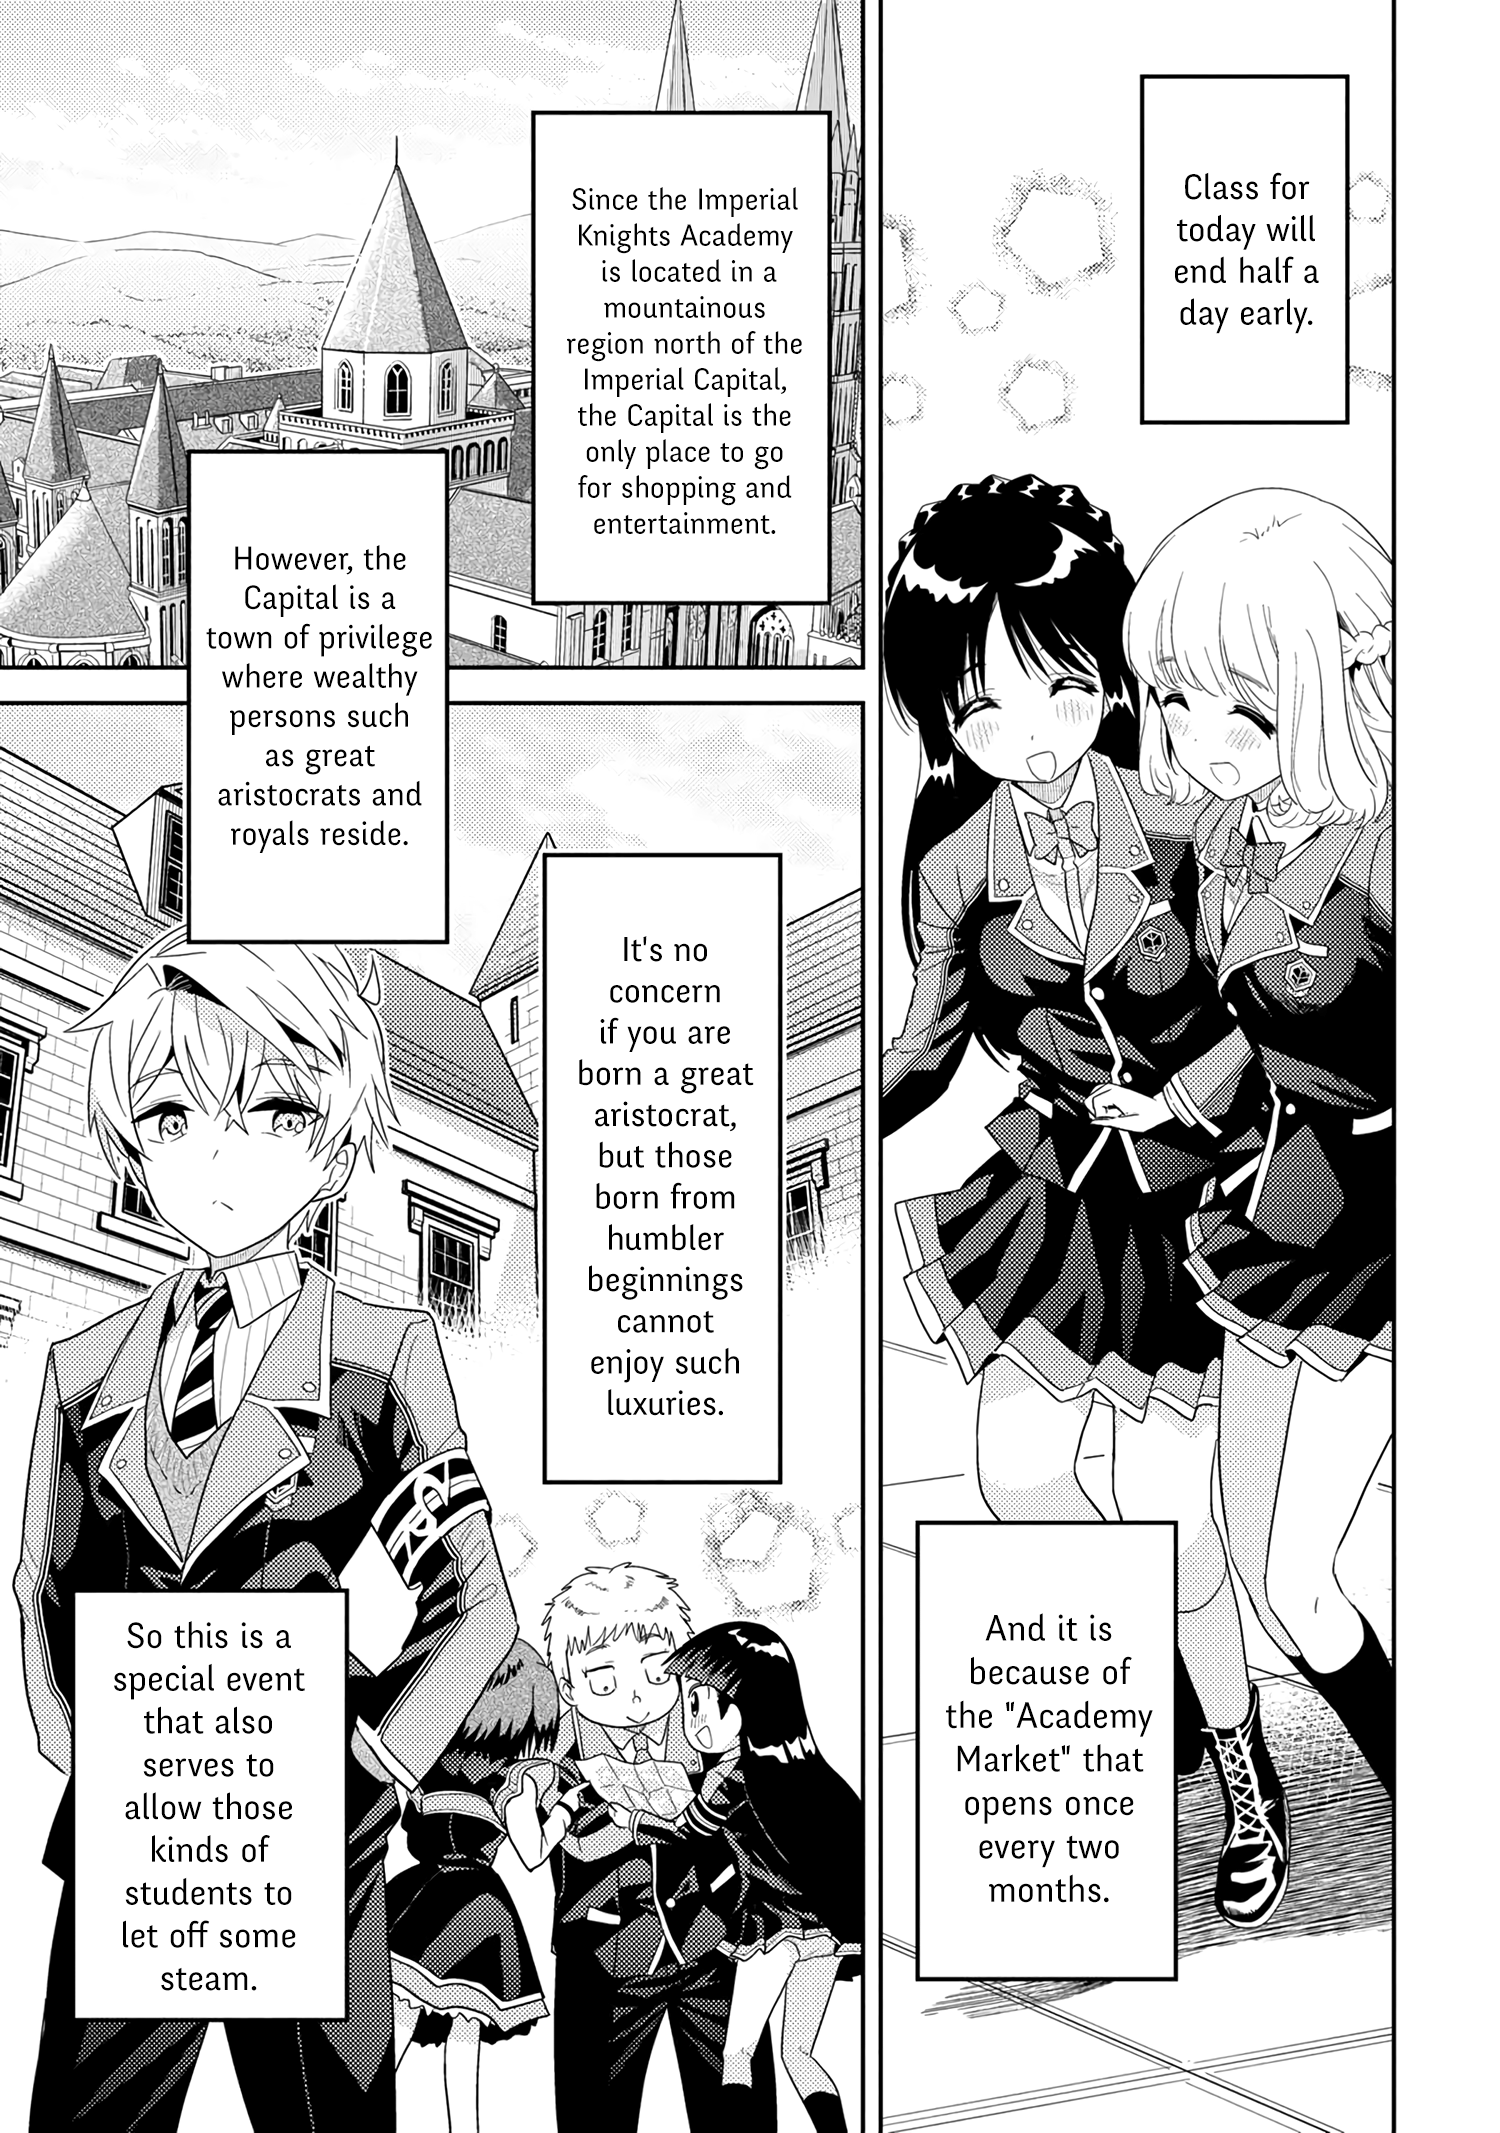 The World's Best Assassin, Reincarnated In A Different World As An Aristocrat - Page 1